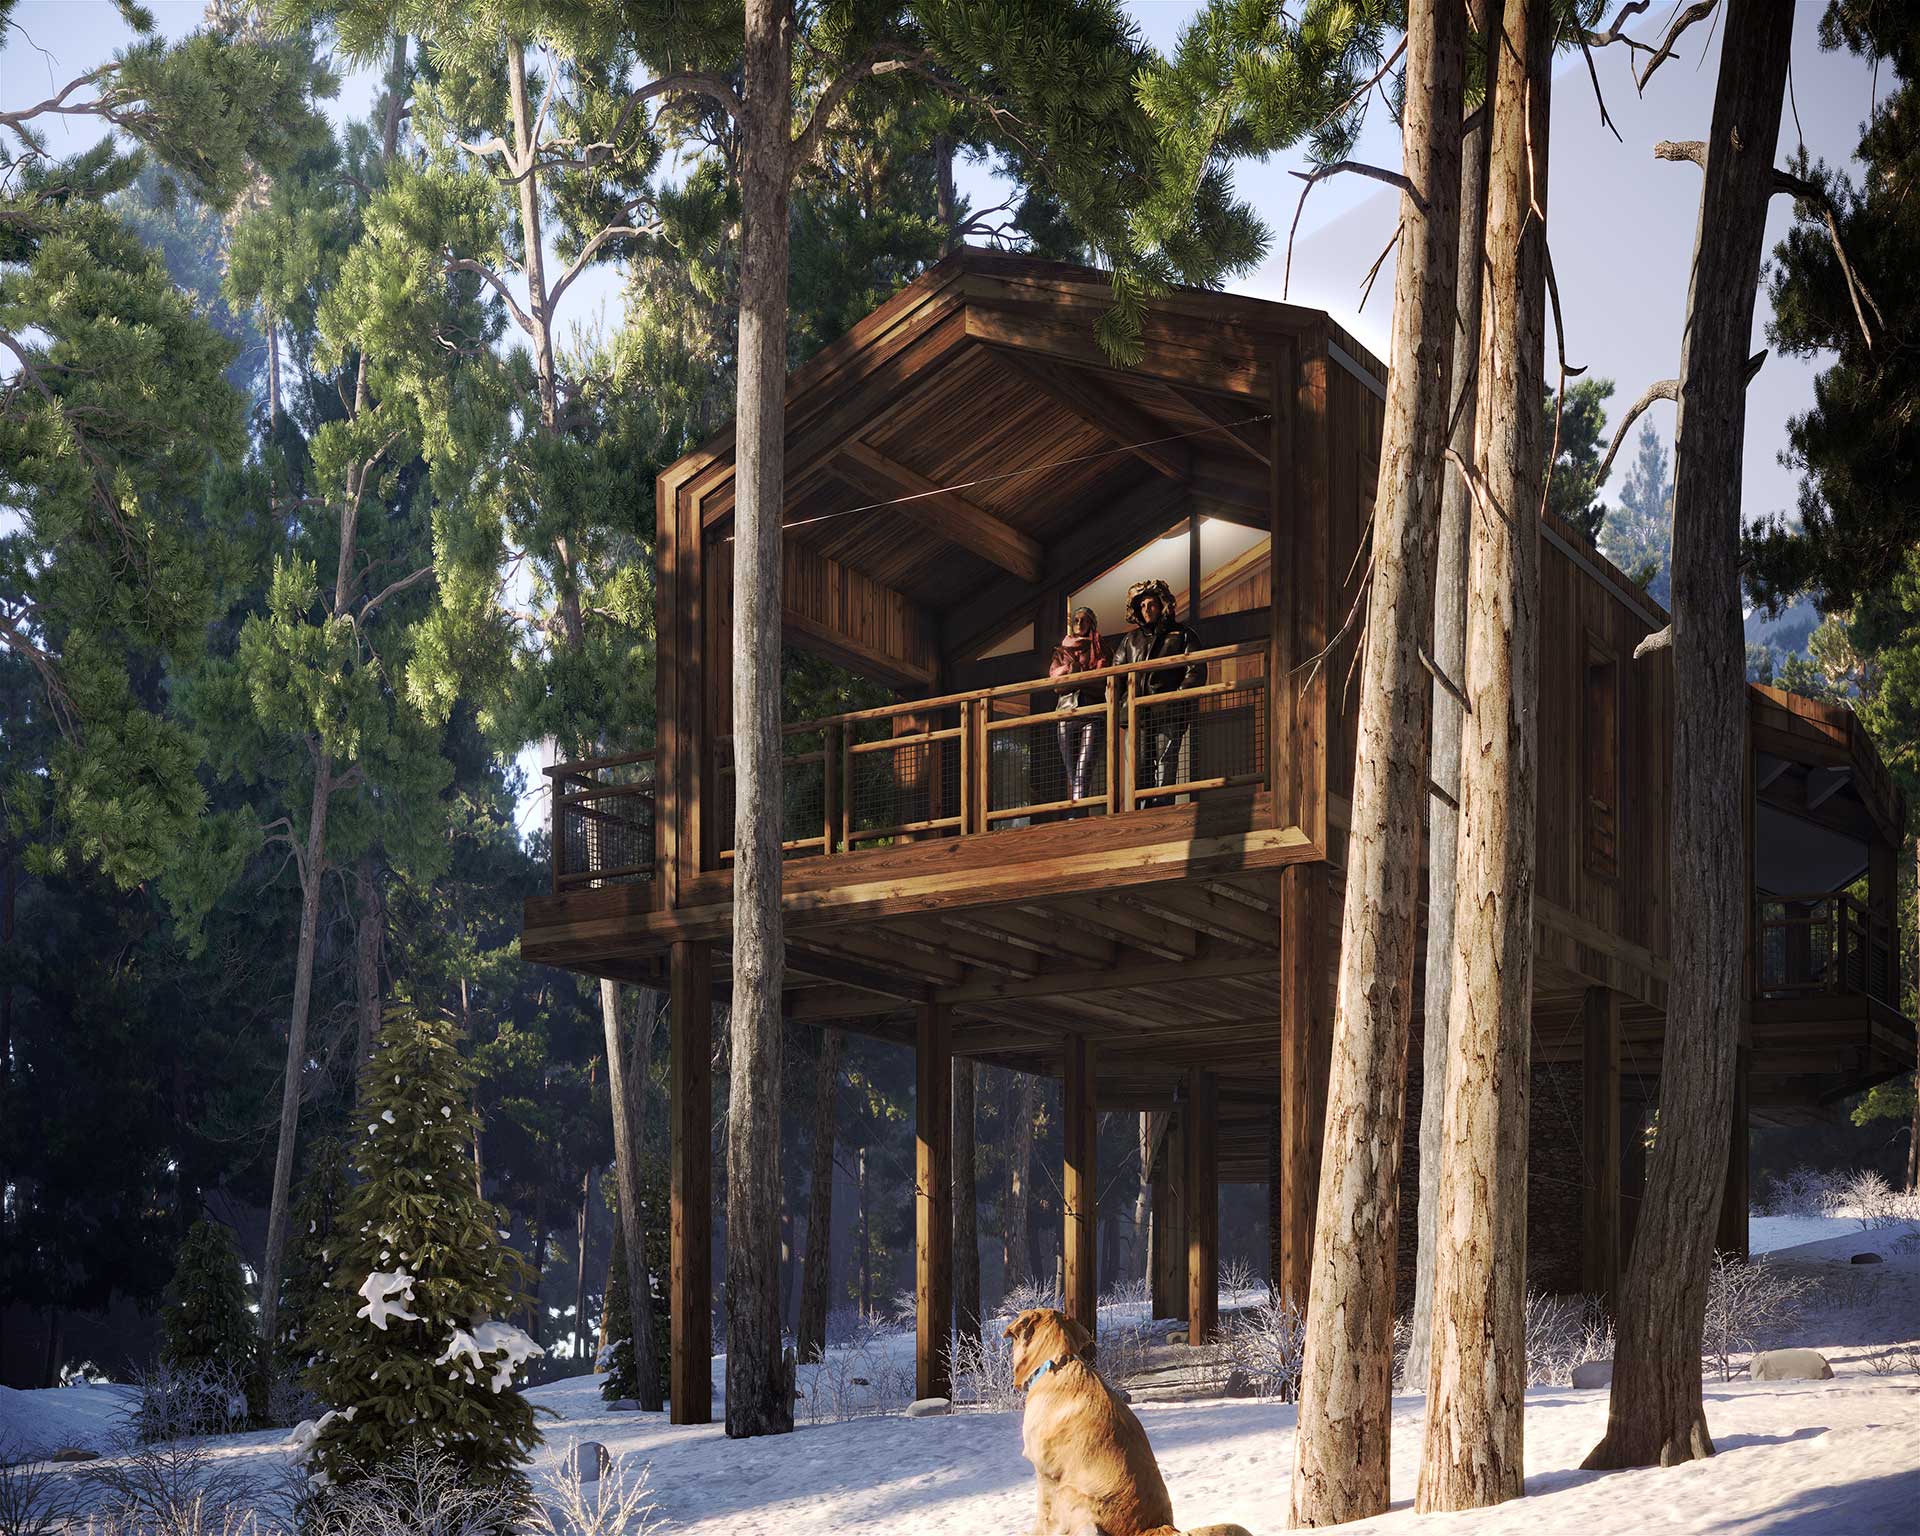 Architectural Visualization - high-end cabin project in a snowy forest